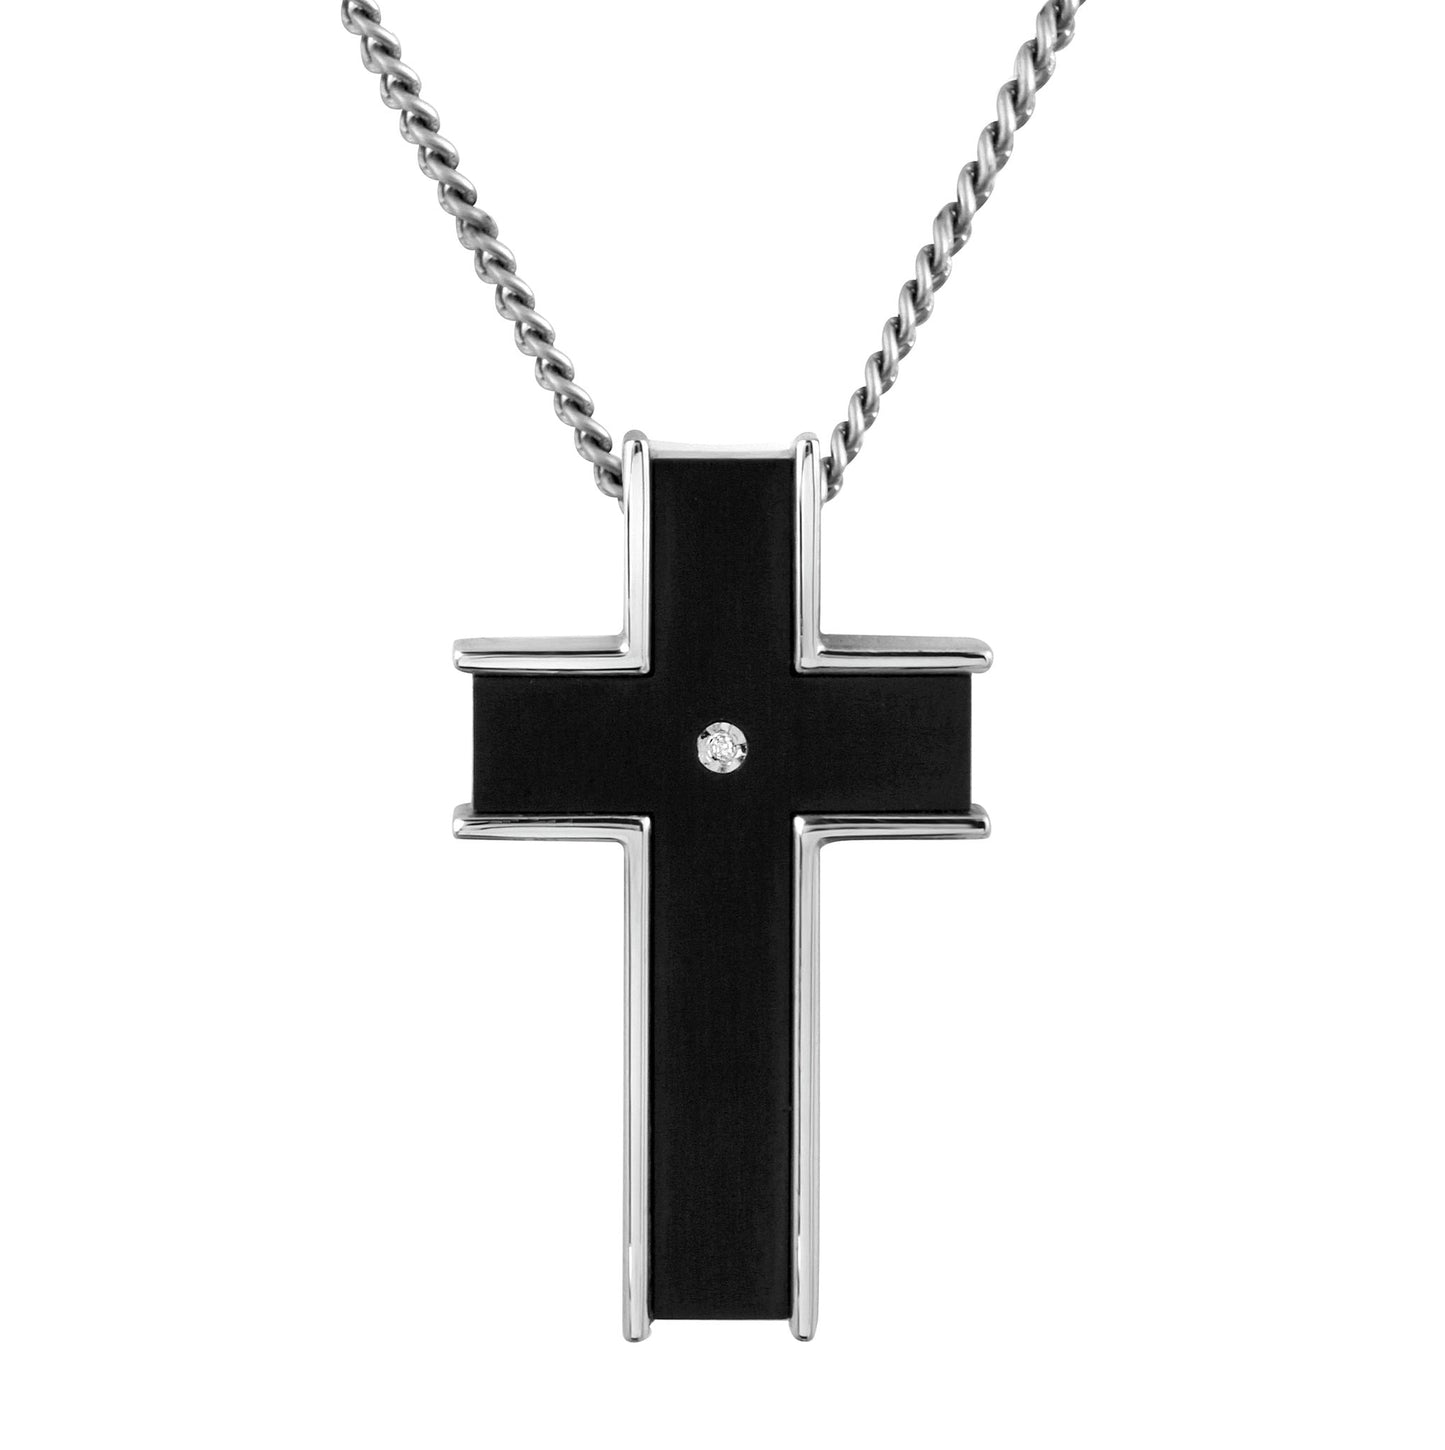 A stainless steel, black titanium & diamond steel cross on 24" chain displayed on a neutral white background.